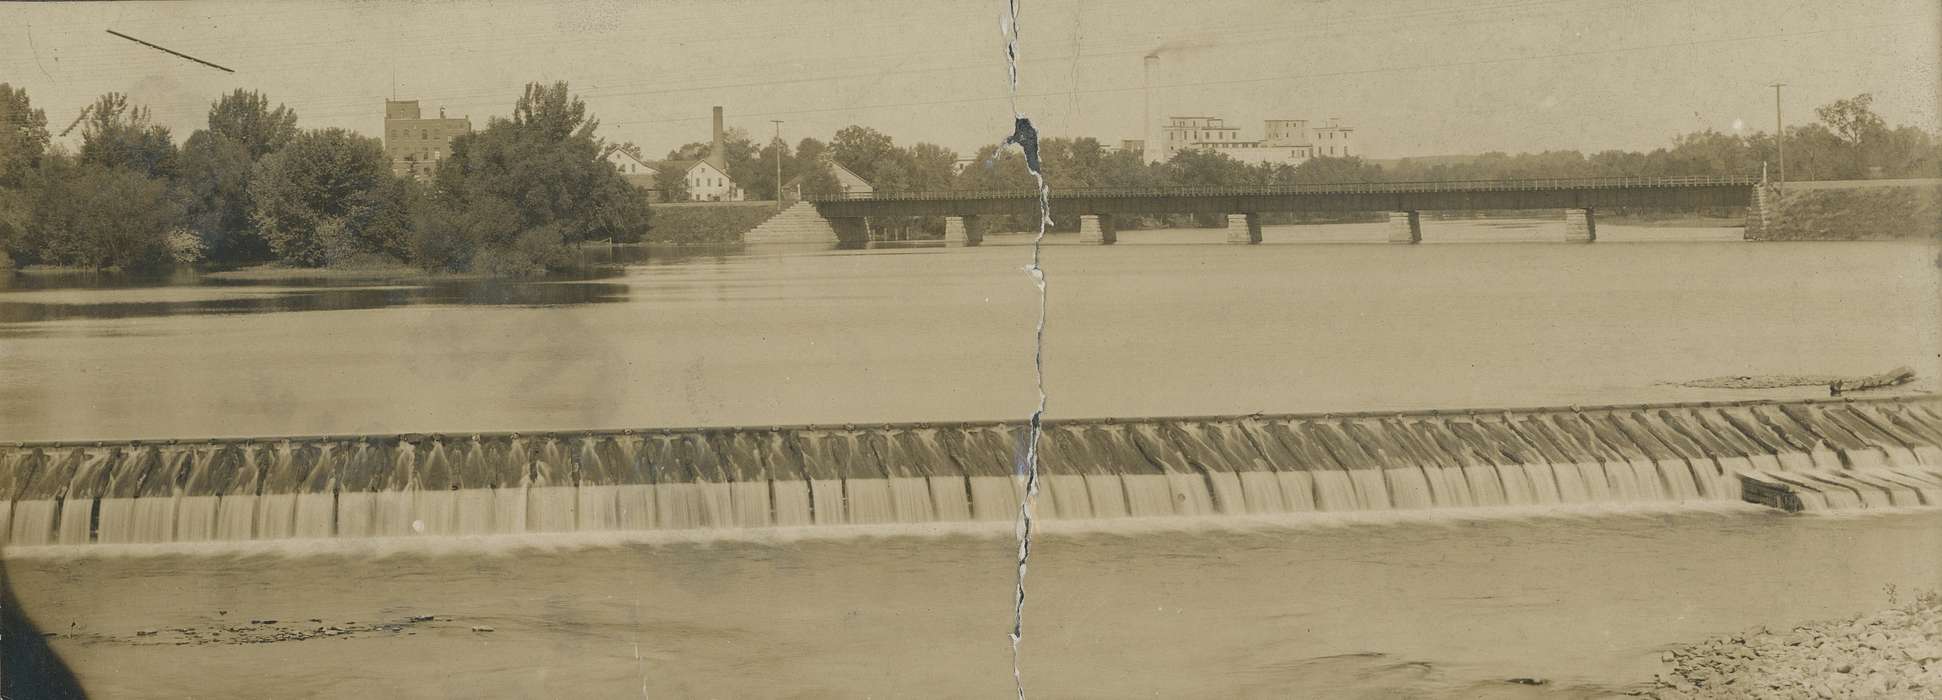 Landscapes, buildings, Businesses and Factories, trees, correct date needed, dam, Waverly Public Library, bridge, river, Waverly, IA, cedar river, Lakes, Rivers, and Streams, Iowa History, Iowa, landscape, history of Iowa, smokestack